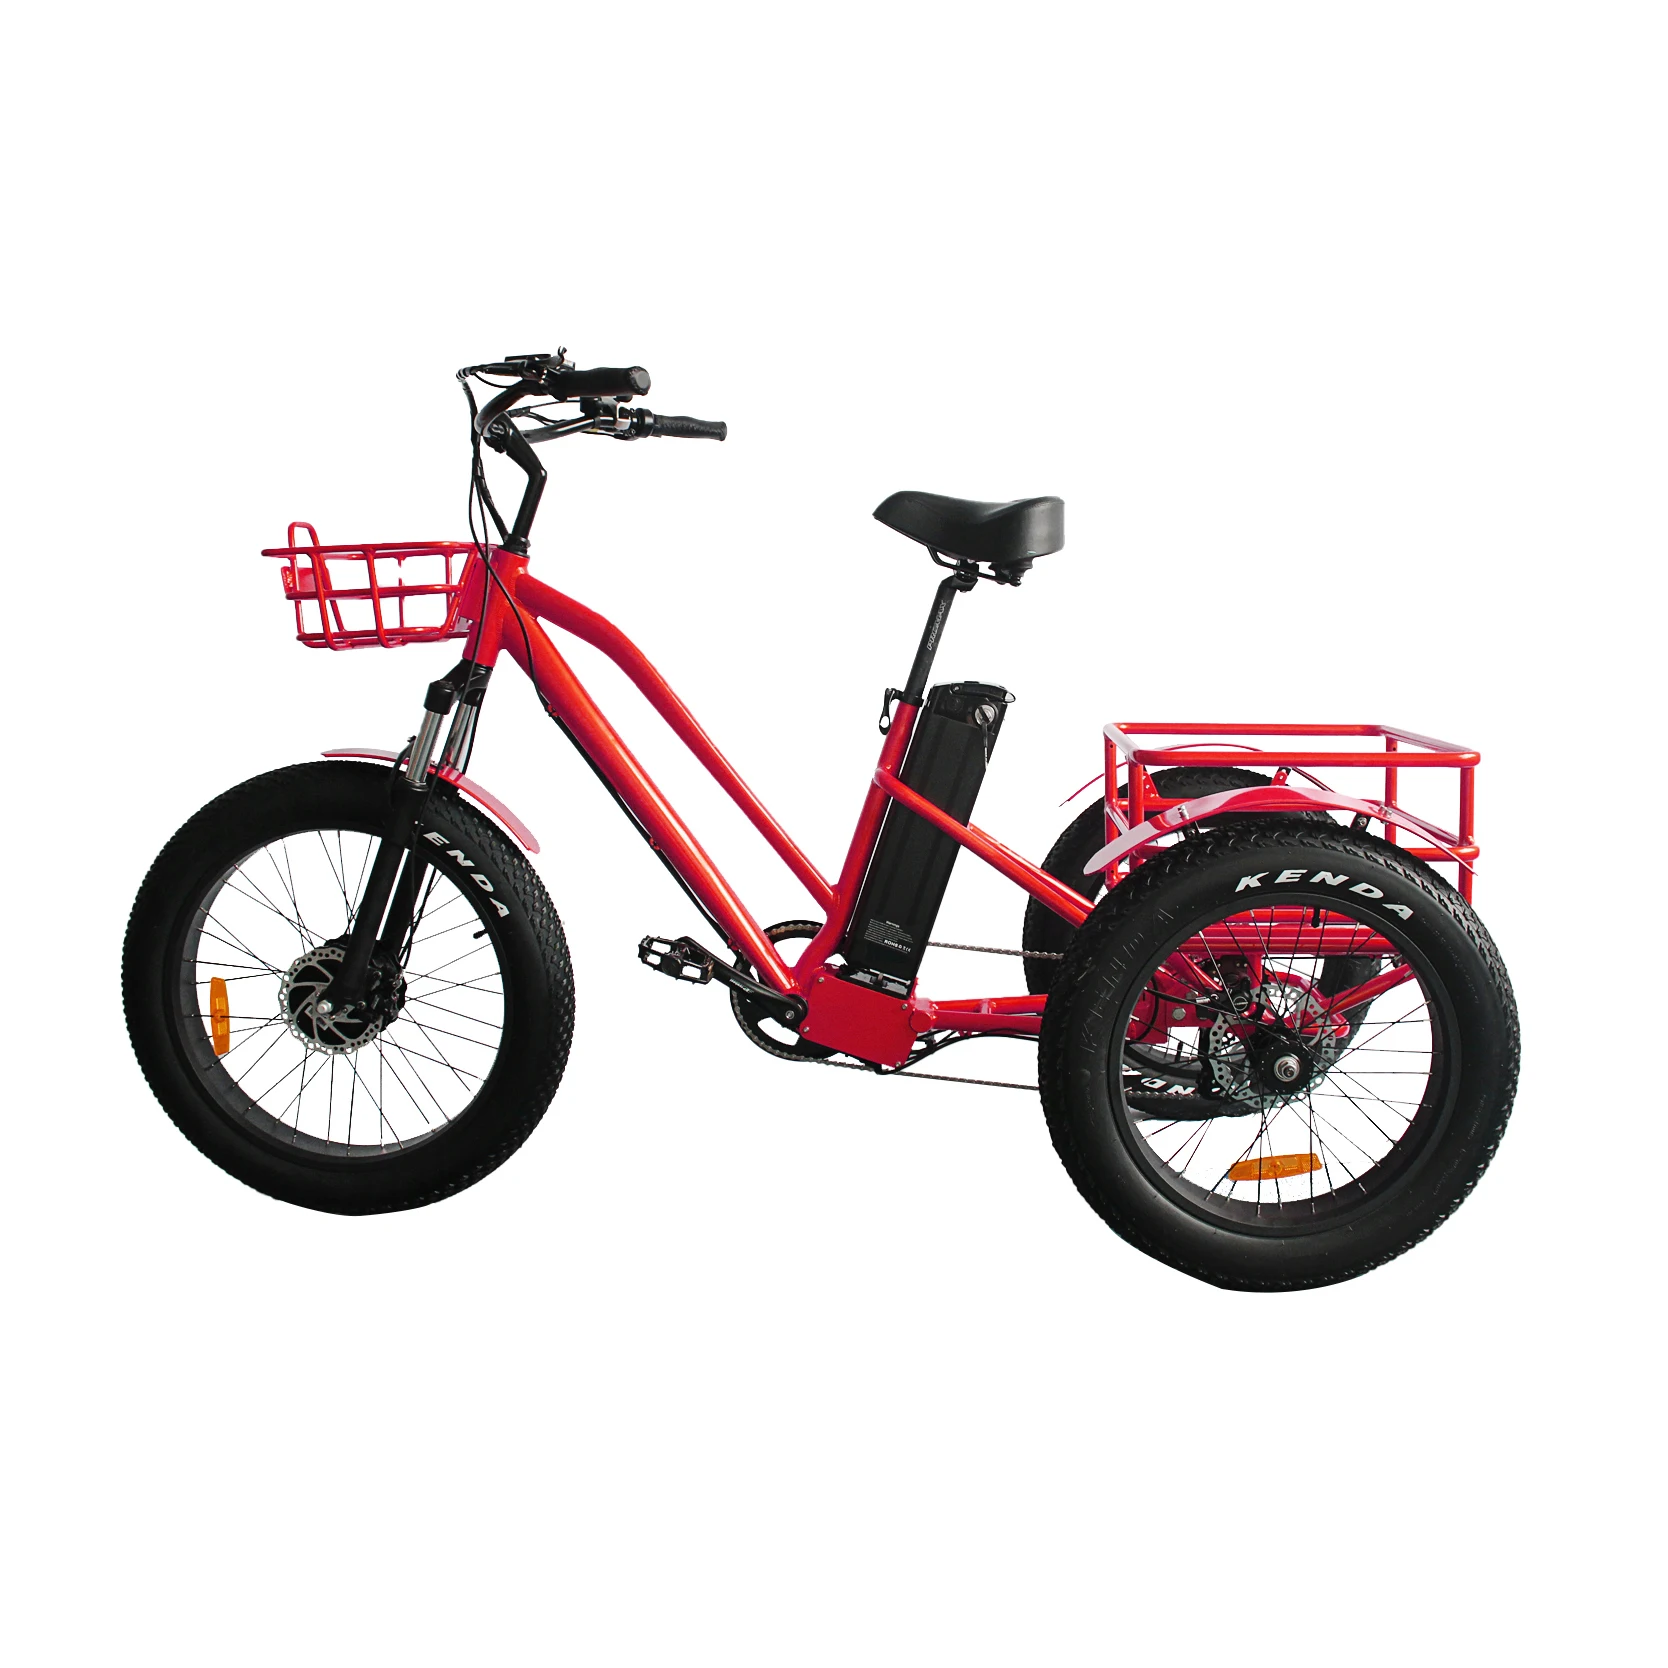 

2022 Ristar 48V 500W fat tire 3 wheel electric bike electric tricycle